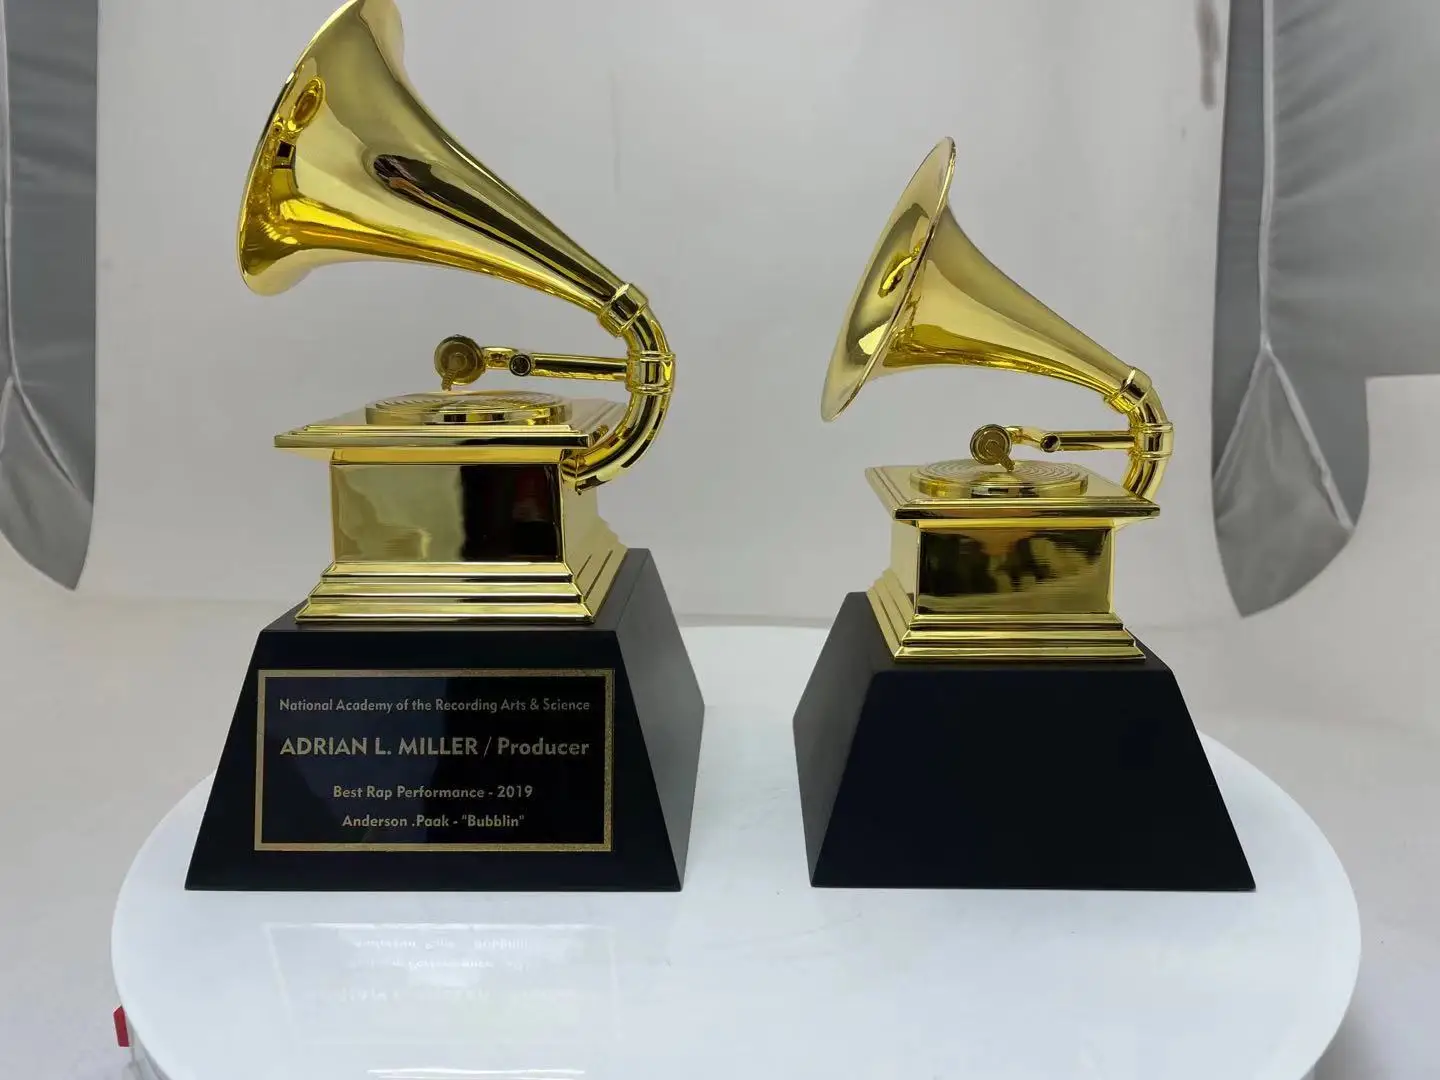 

Full Size Can order Halloween Replica Grammy MTV GRAMMYS Awards Gramophone Metal Trophy NARAS Nice Gift Souvenir Collections